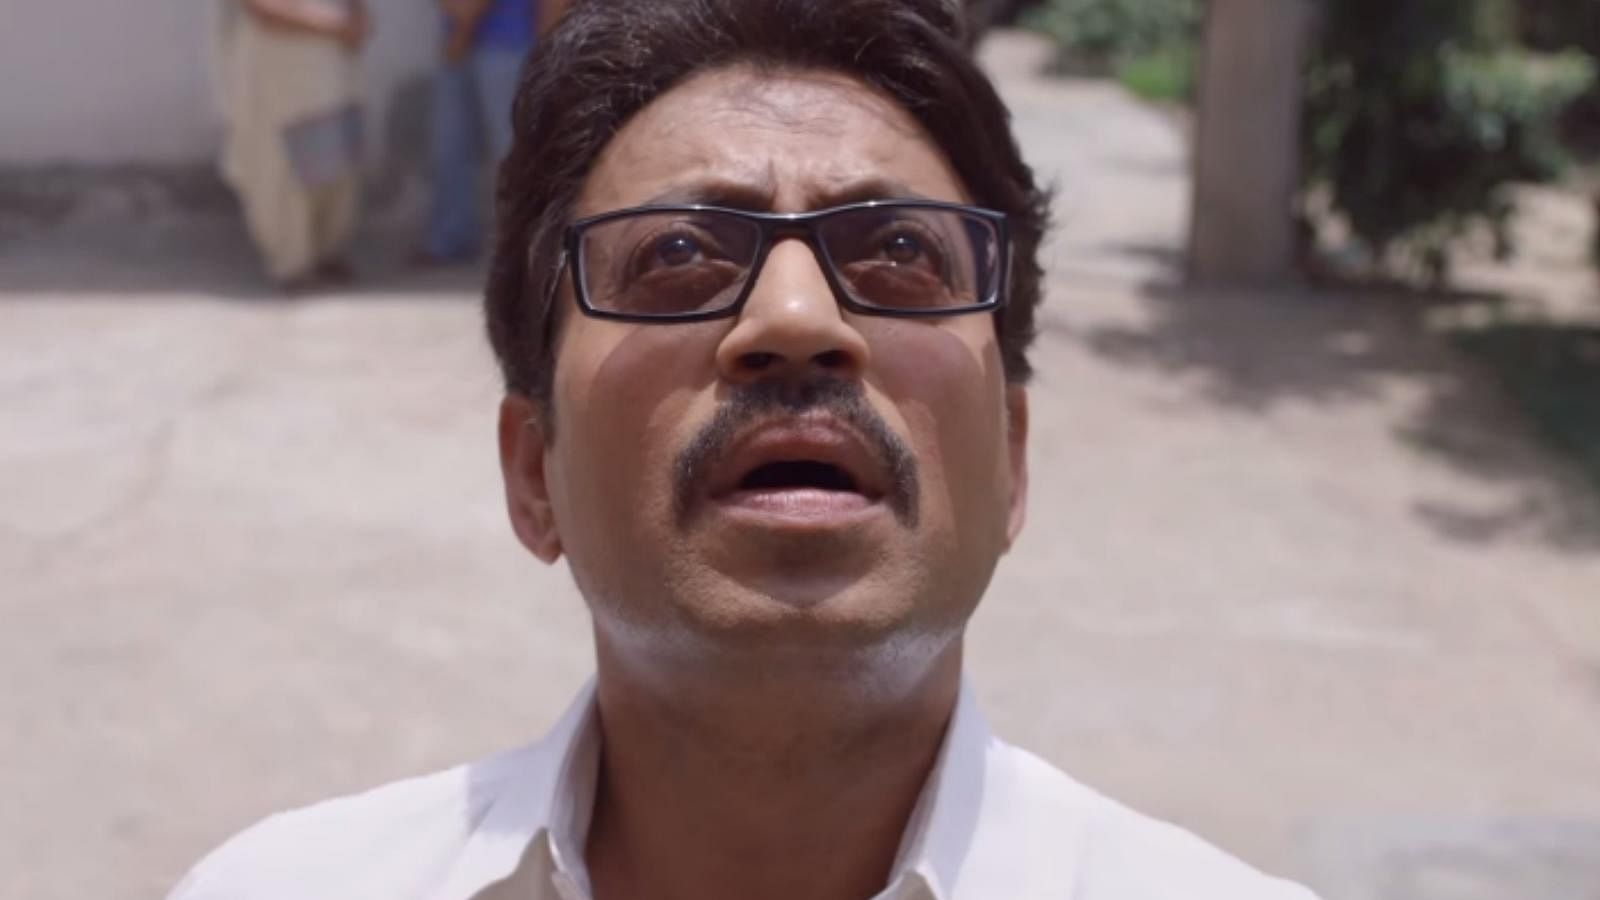 Irrfan Khan plays the investigating officer in Meghna Gulzar’s film, based on the Aarushi Talwar murder case (Photo: <a href="https://www.youtube.com/watch?v=w_kEnbHYb2I">YouTube/Junglee Pictures</a>)